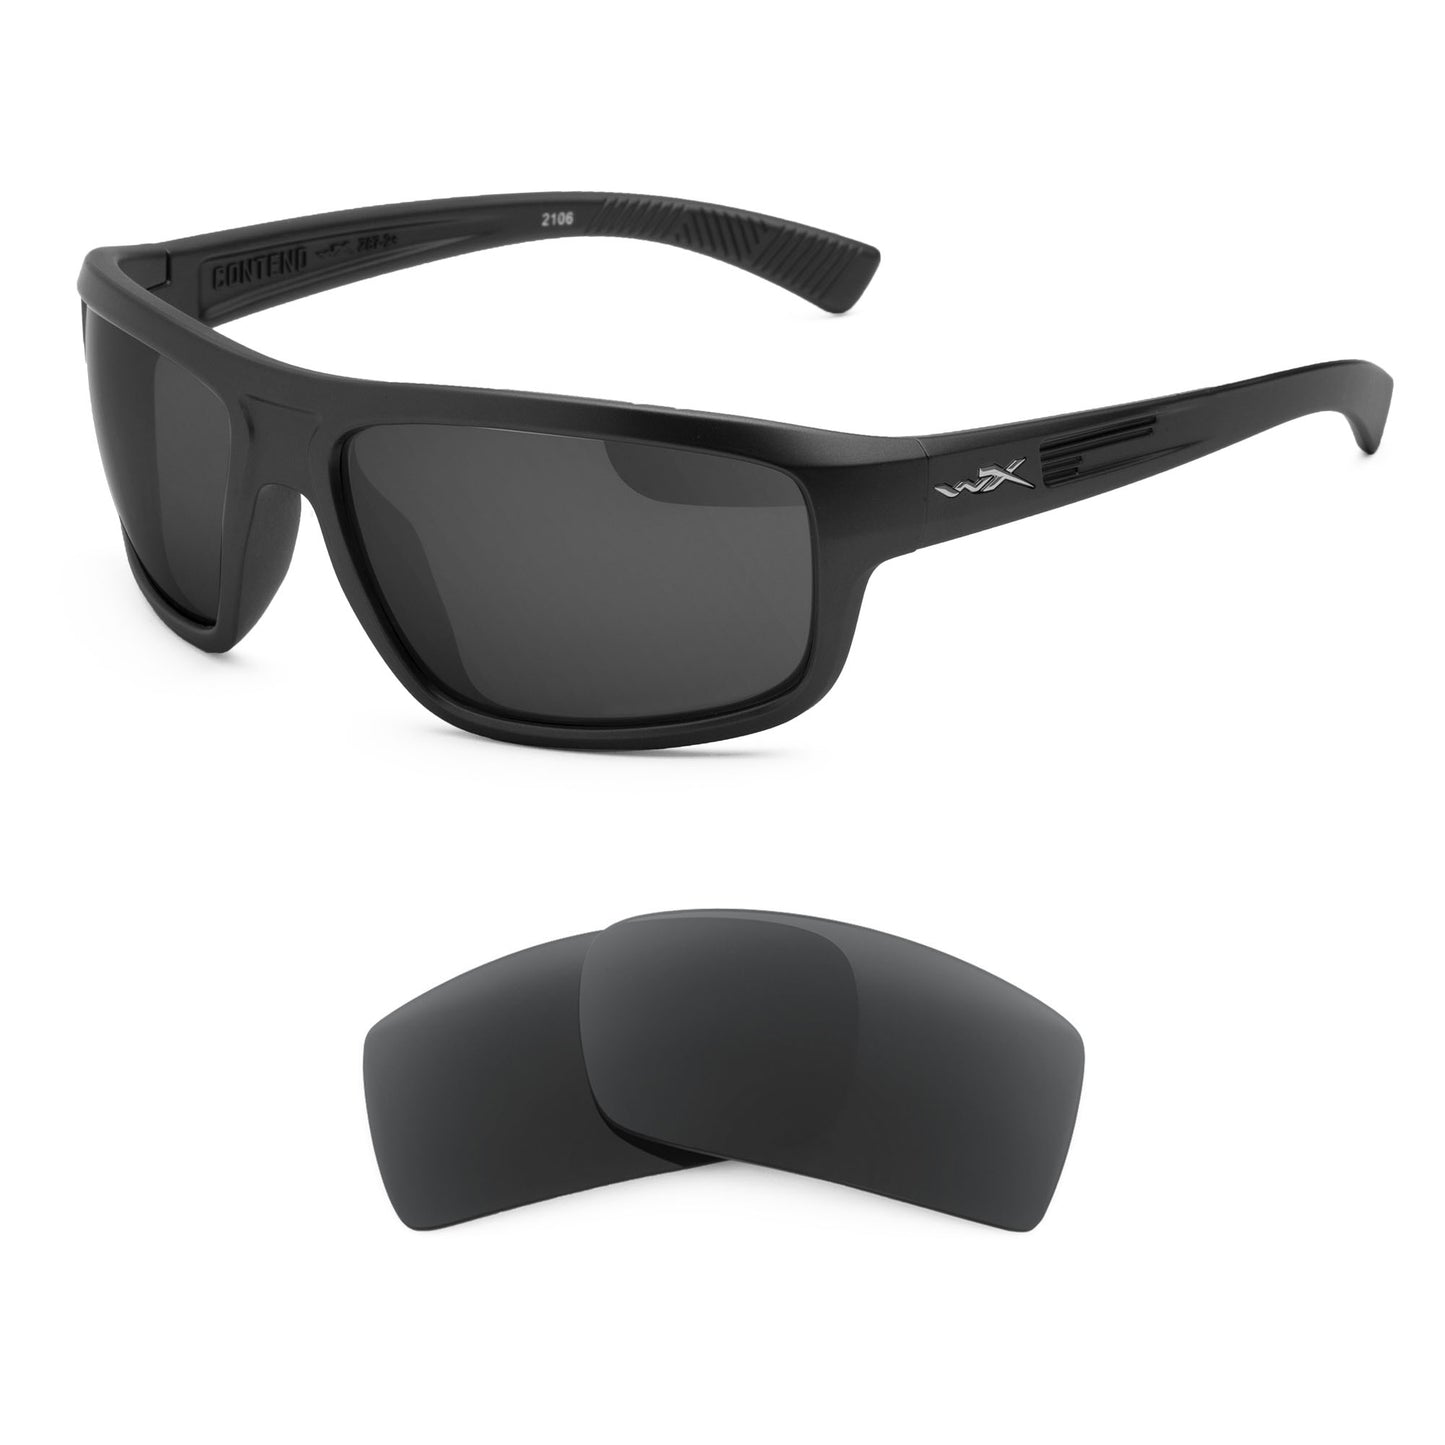 Wiley X Contend sunglasses with replacement lenses